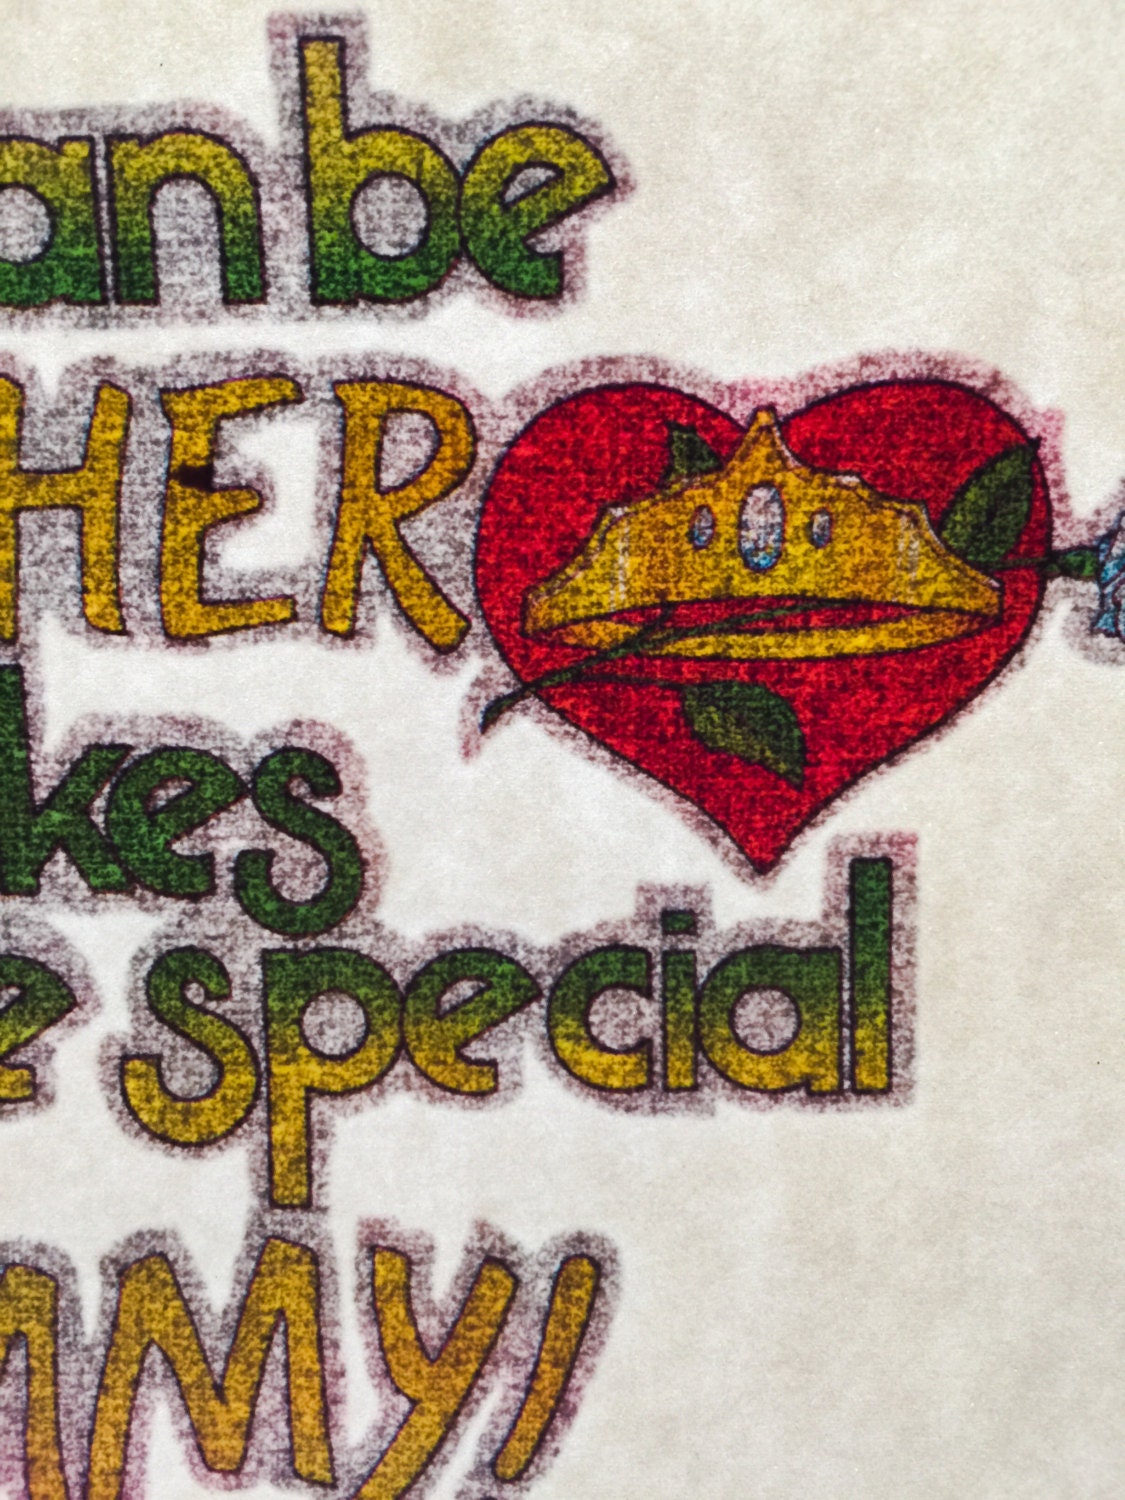 Anyone Can be a Mother... Vintage Glitter Iron On Heat Transfer